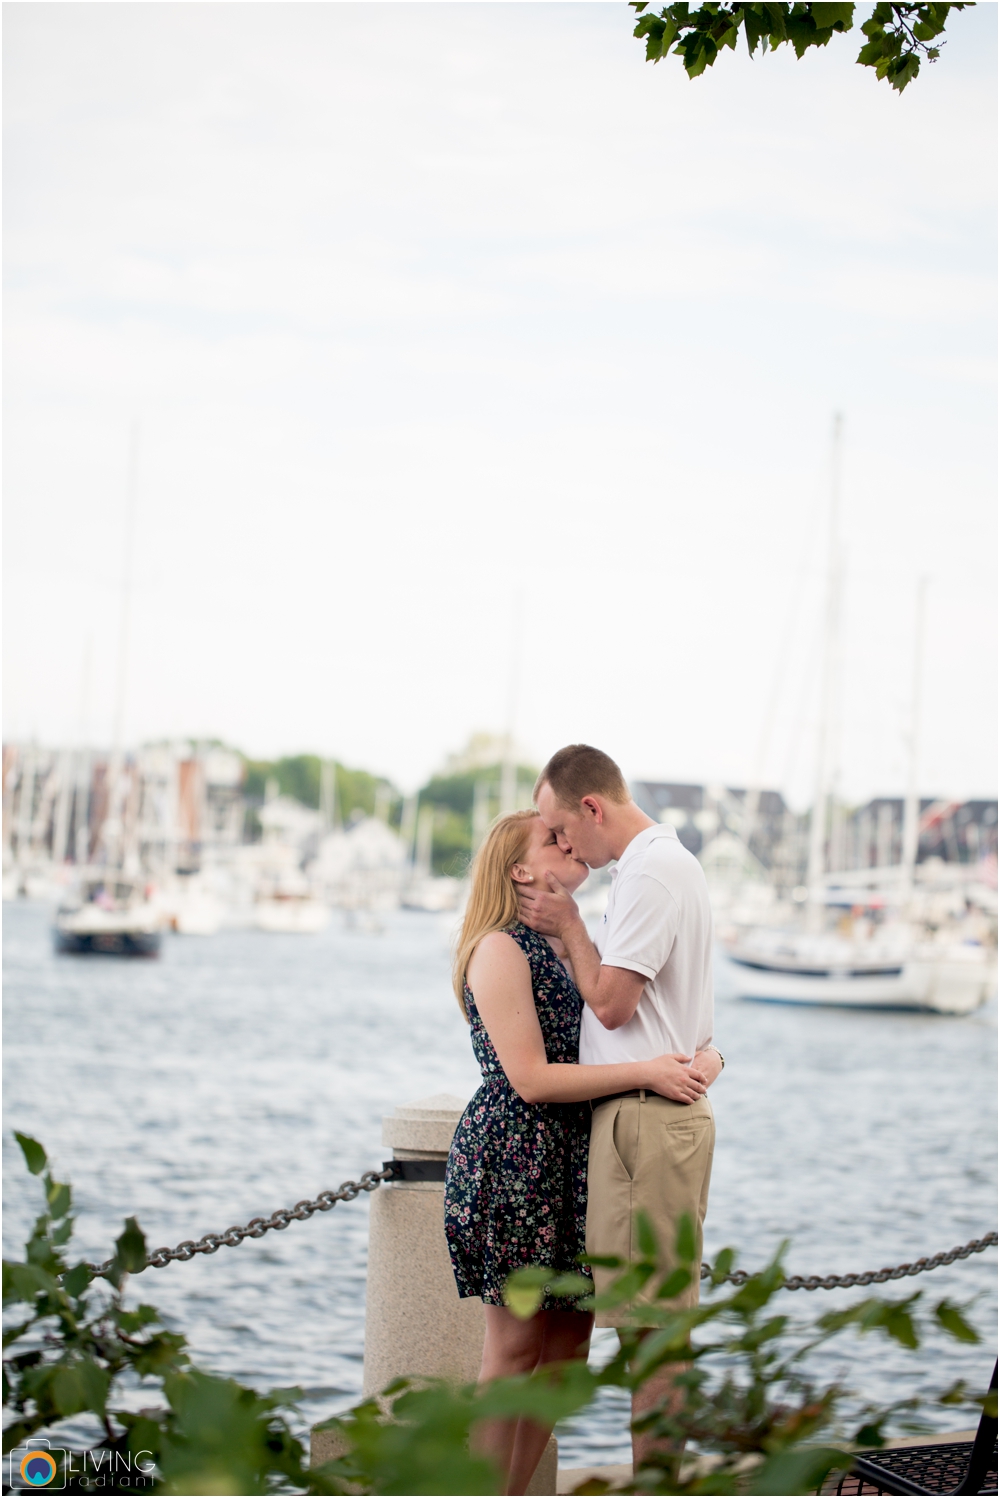 casey-clark-engaged-annapolis-downtown-naval-academy-engagement-session-living-radiant-photography-maggie-patrick-nolan-outdoor-water-boats_0017.jpg